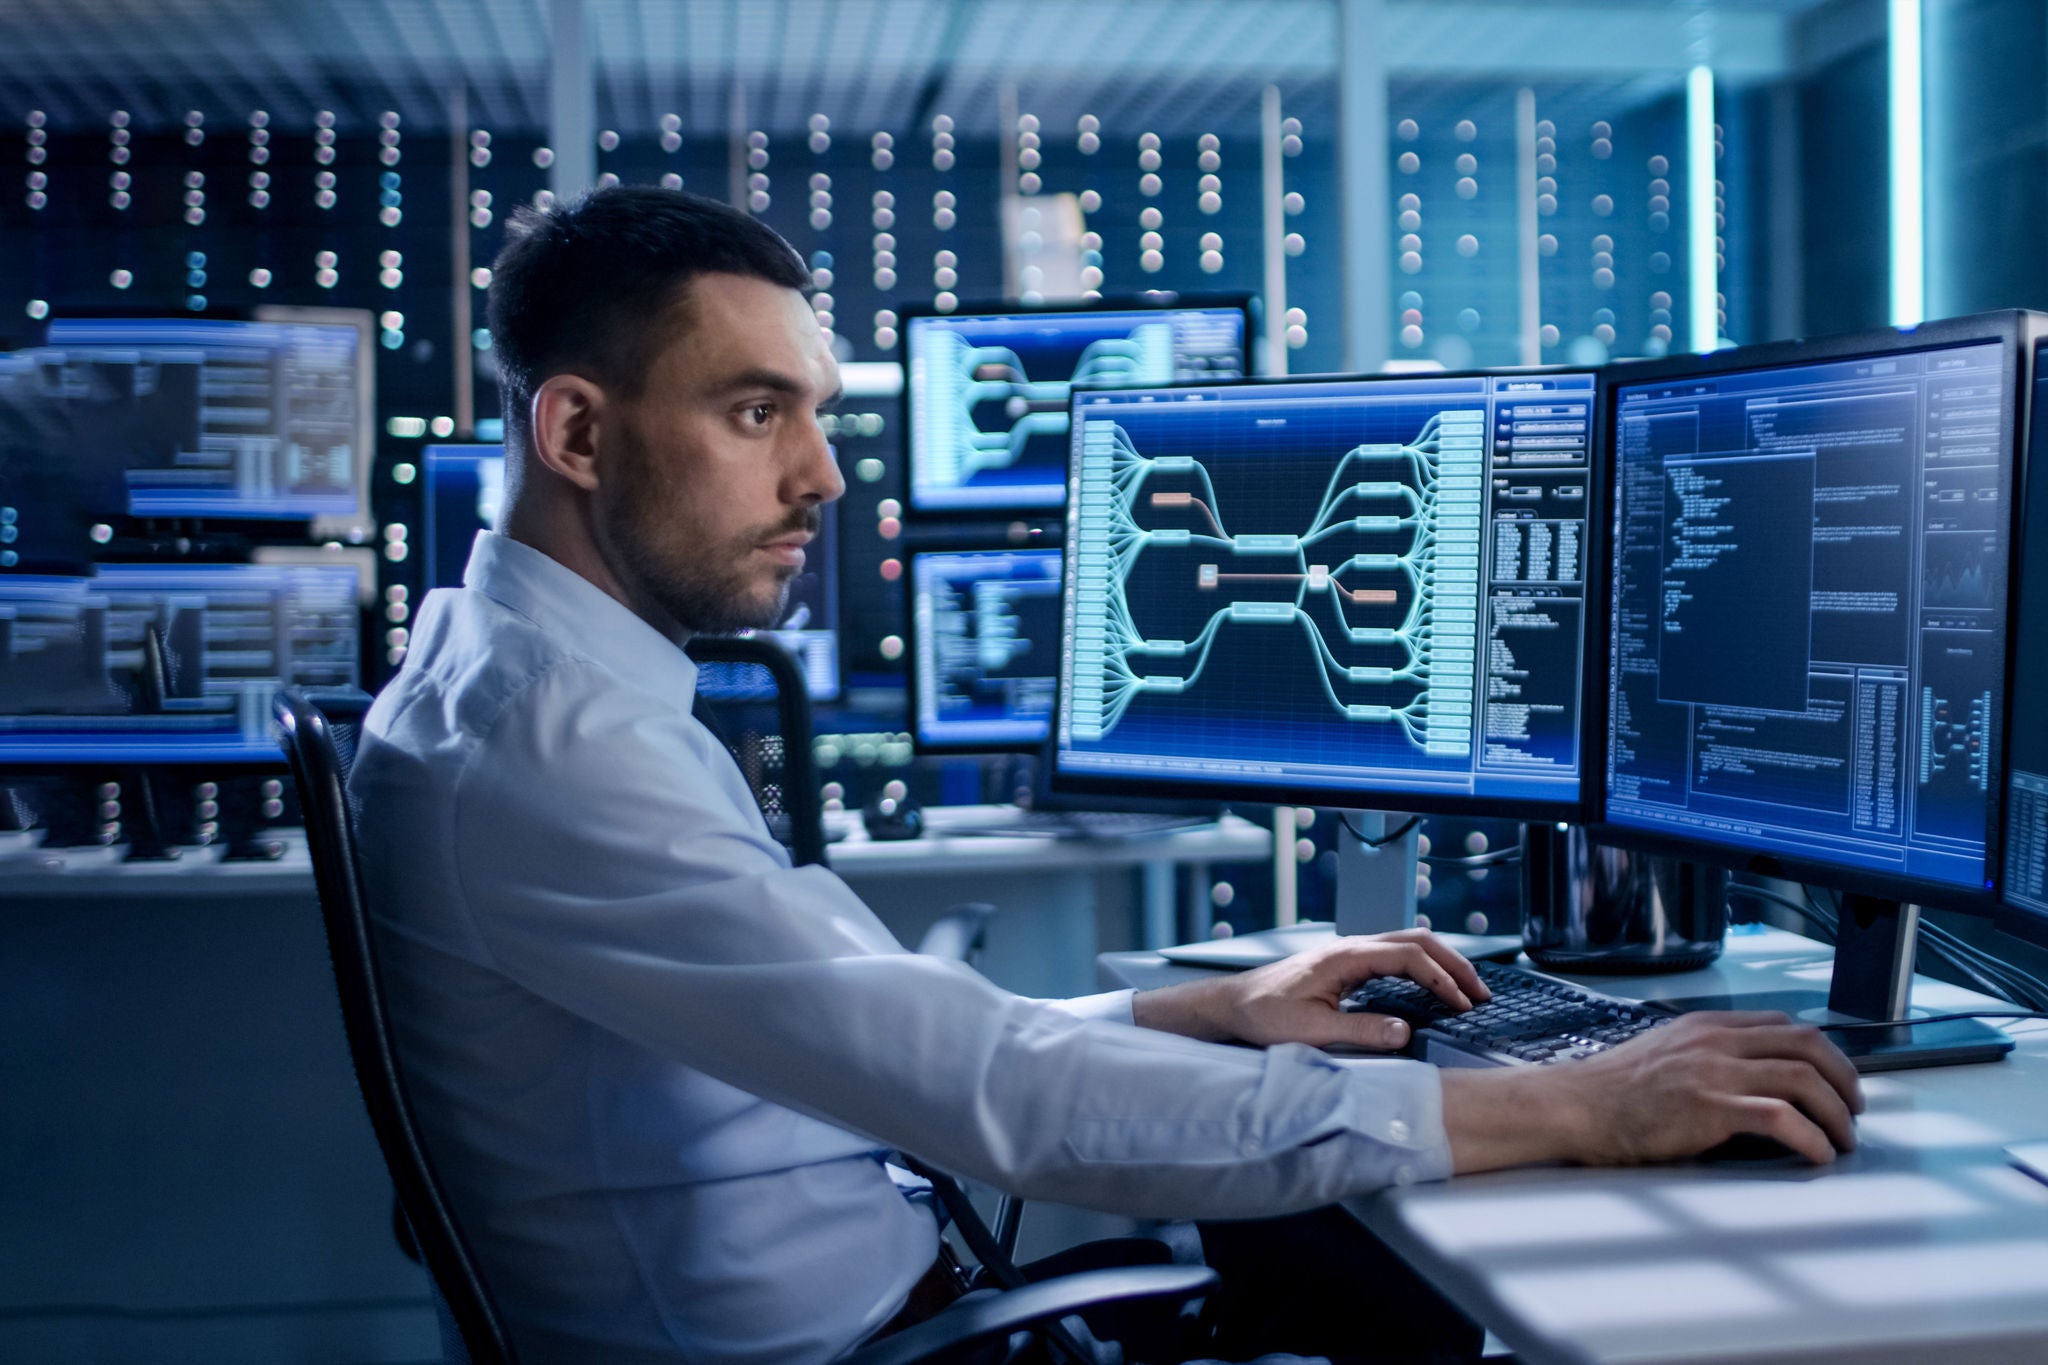 EY System Security Specialist Working at System Control Center